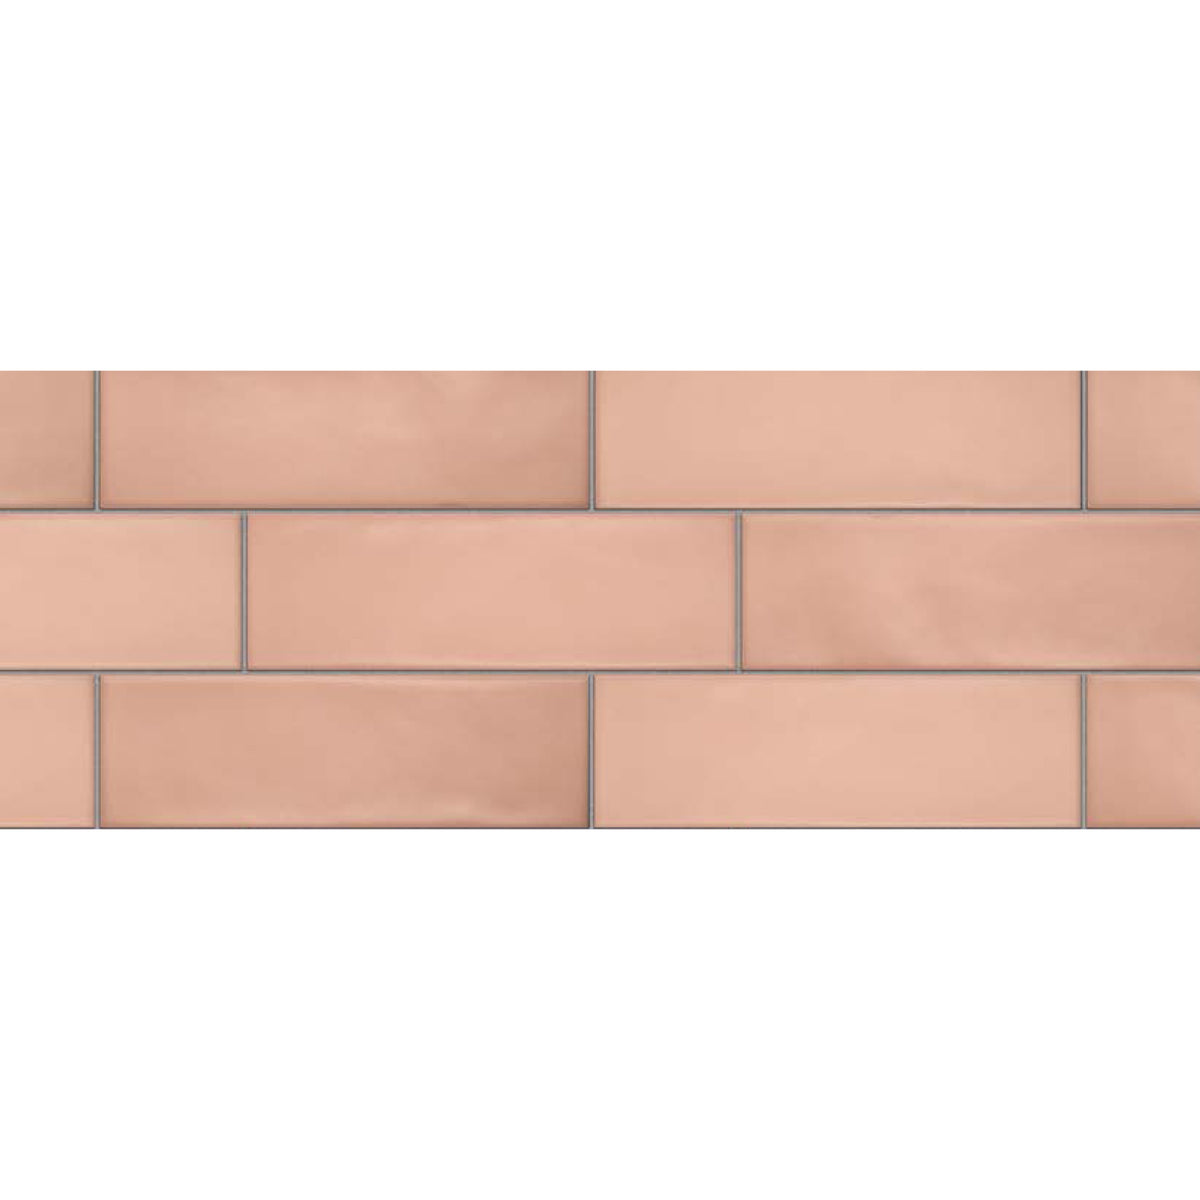 Topcu - Chalky - 2.5 in. x 8 in. Ceramic Wall Tile - Nude Installled